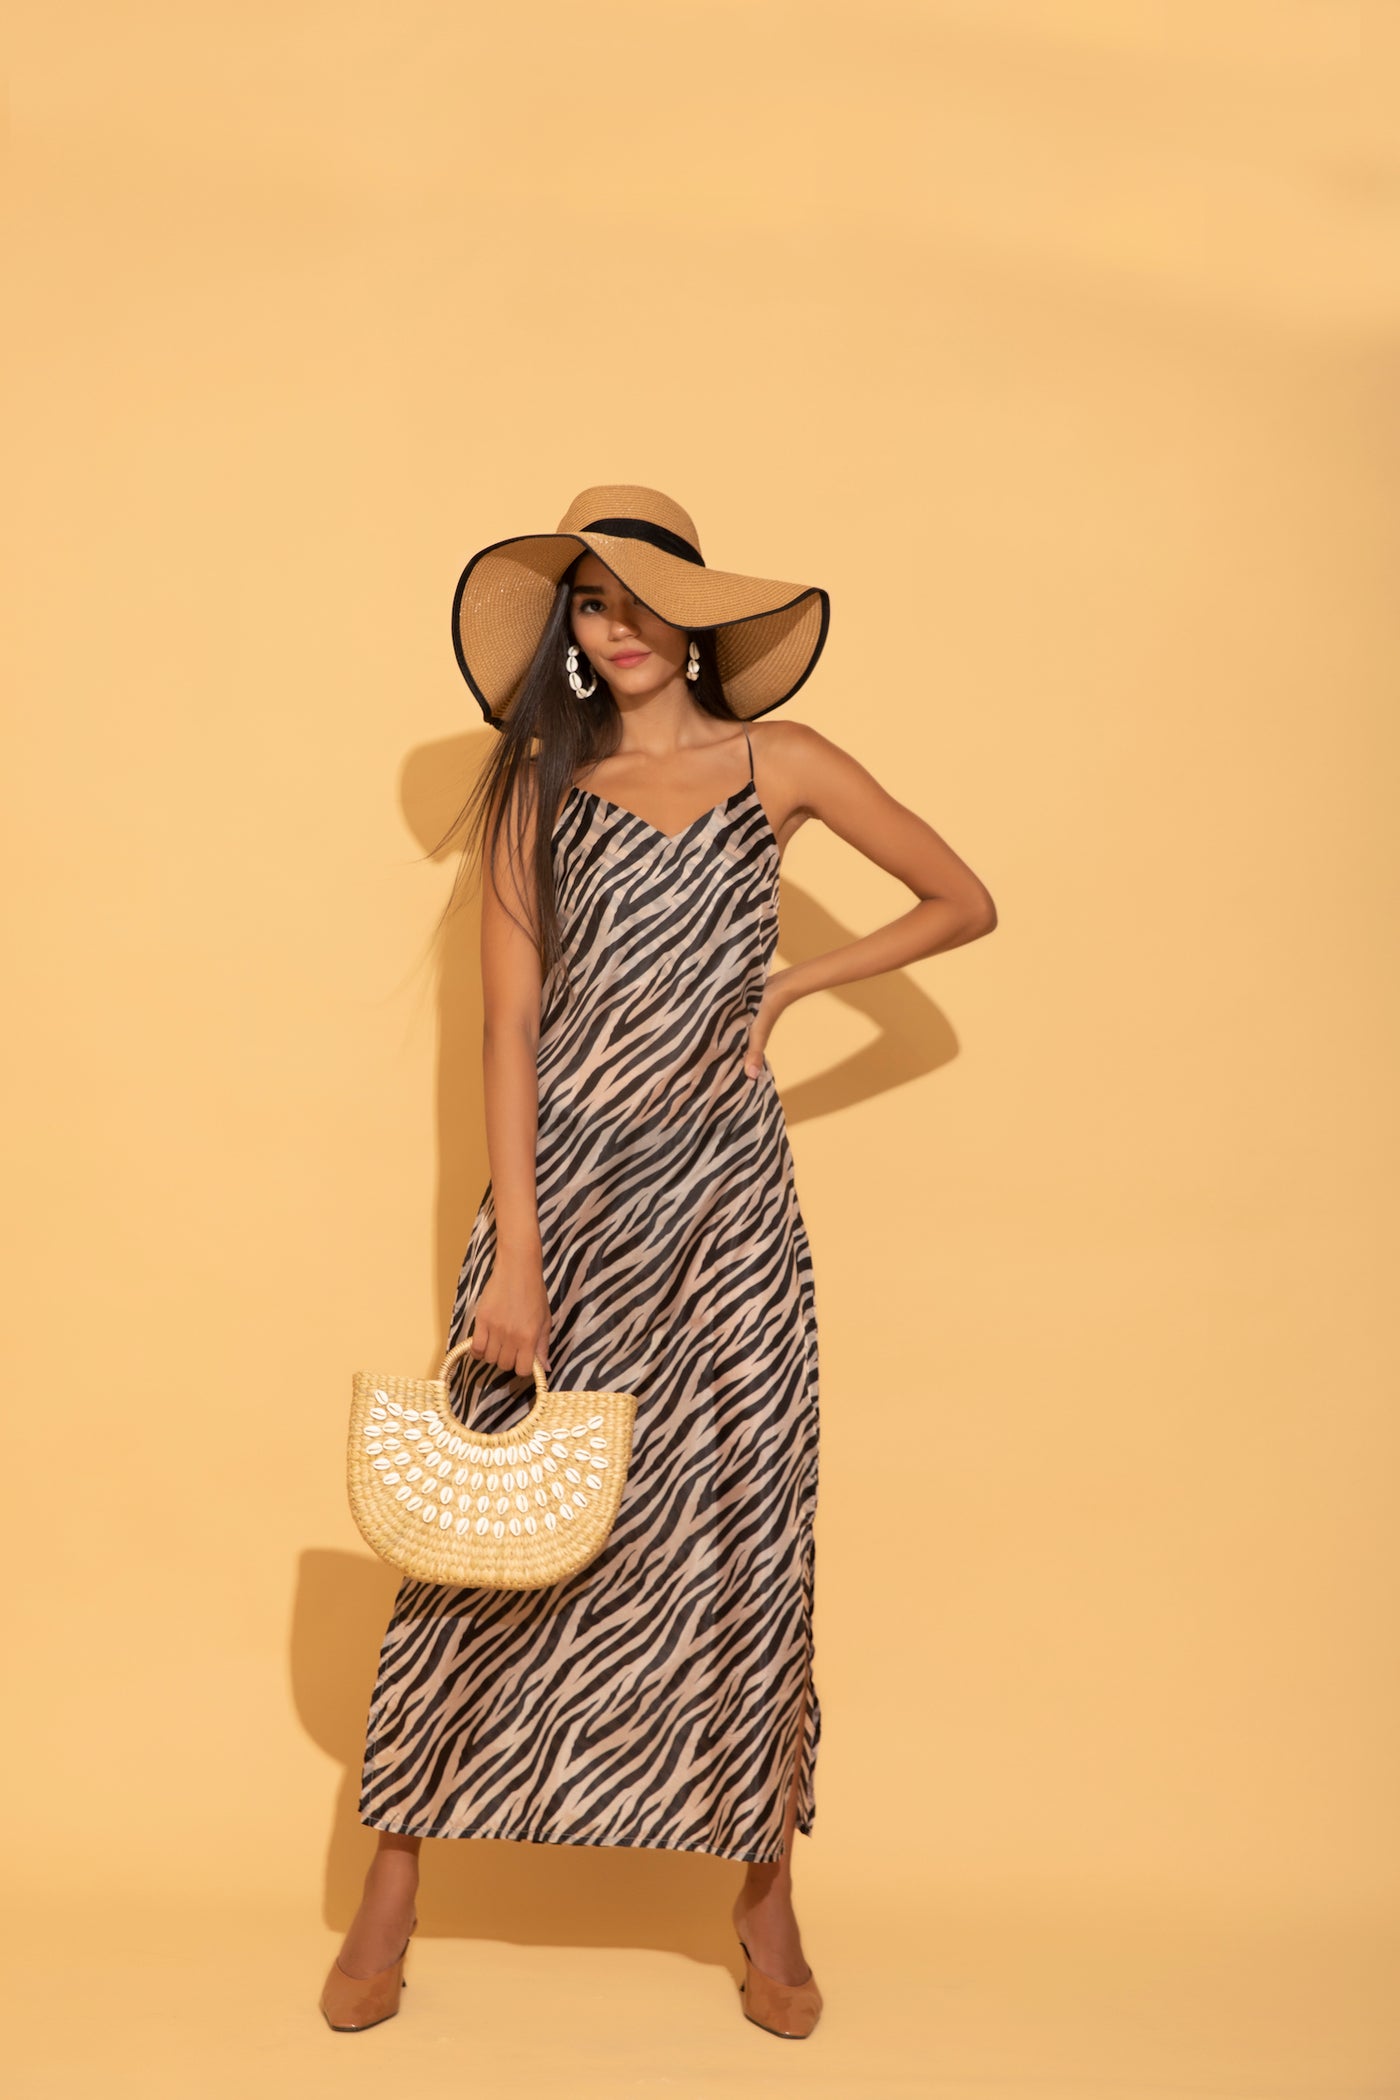 Torqadorn's zebra printed maxi dress in satin georgette, an ideal for beach or summer vacations.